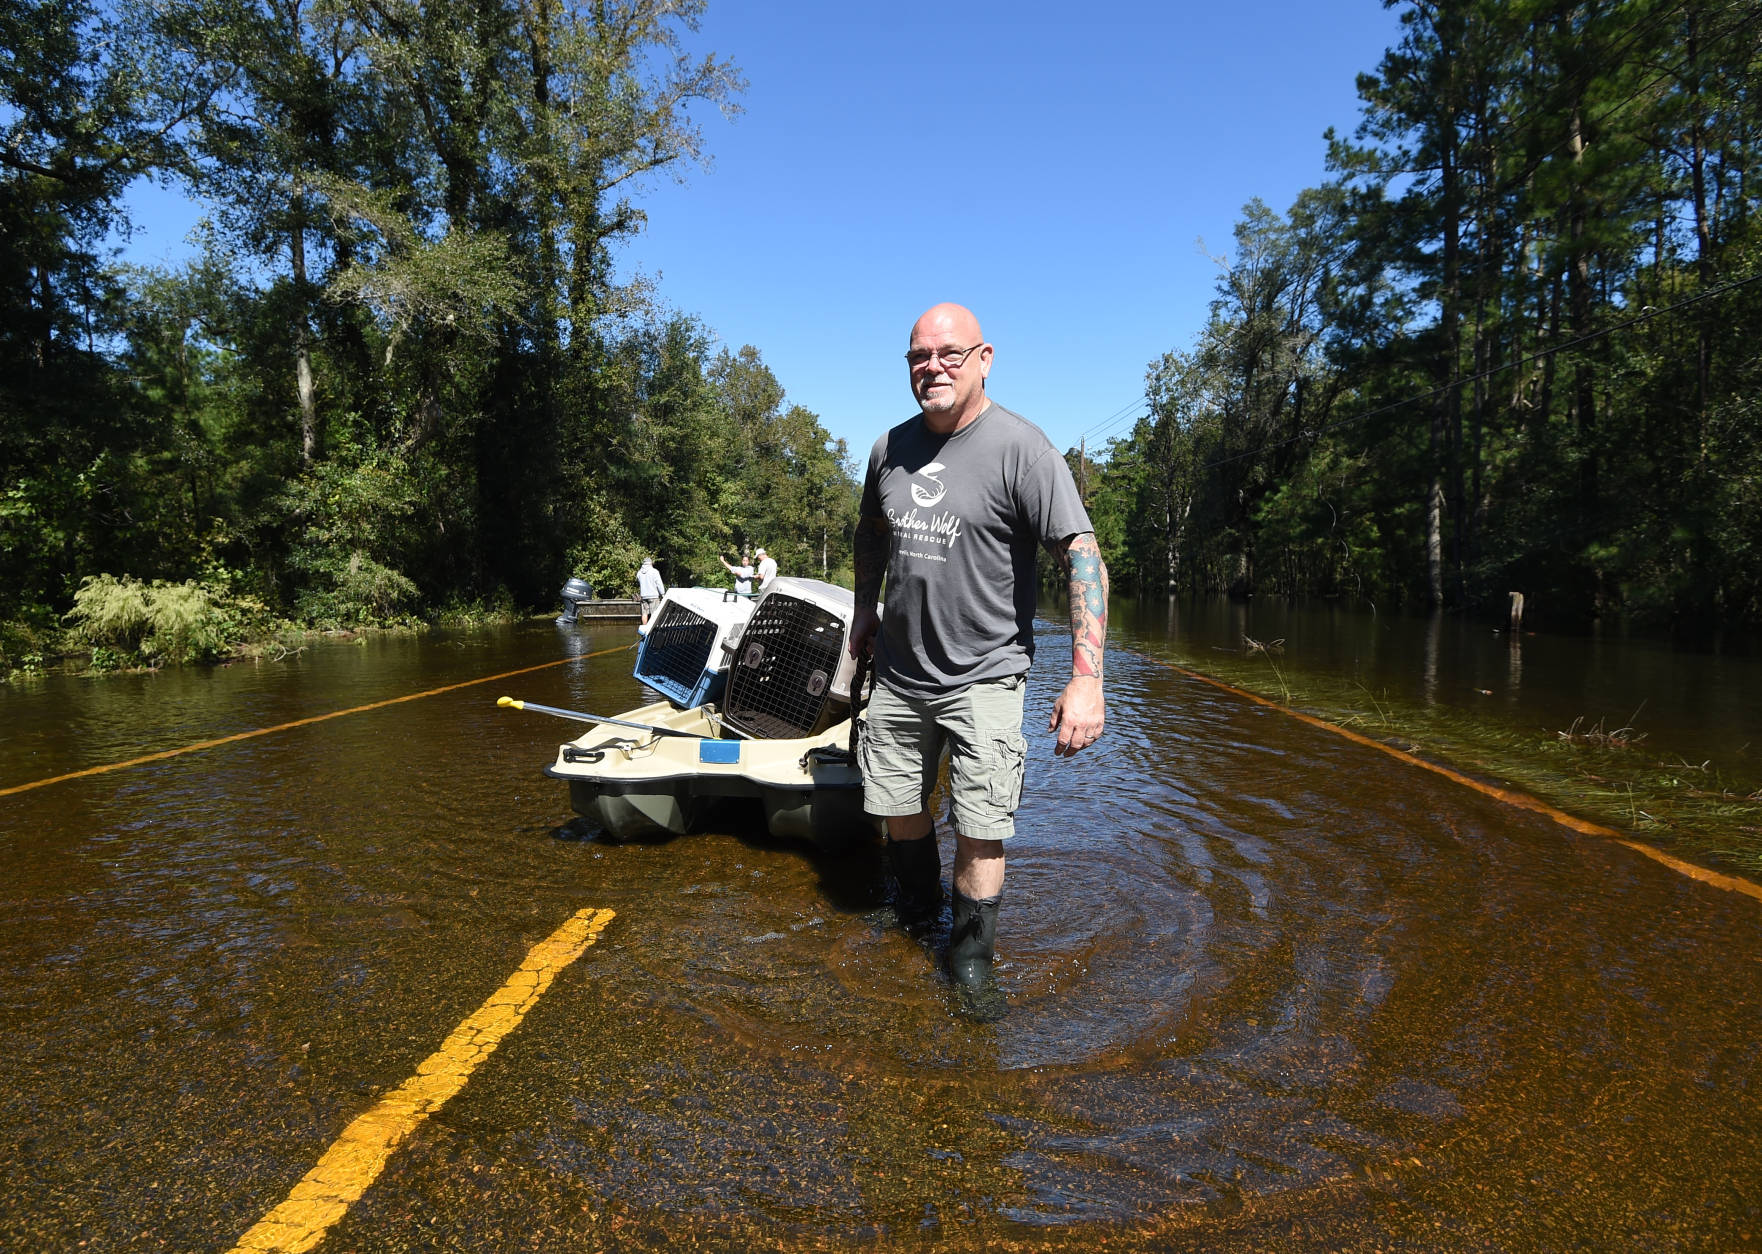 Tom Chickos, of Ashville, N.C. with Brother Wolf Animal Rescue, pulls a boat with kennels down Highway 9 on Tuesday, Oct. 11, 2016, in Nichols, S.C. About 150 people were rescued by boats from flooding in the riverside village of Nichols on Monday. (AP Photo/Rainier Ehrhardt)